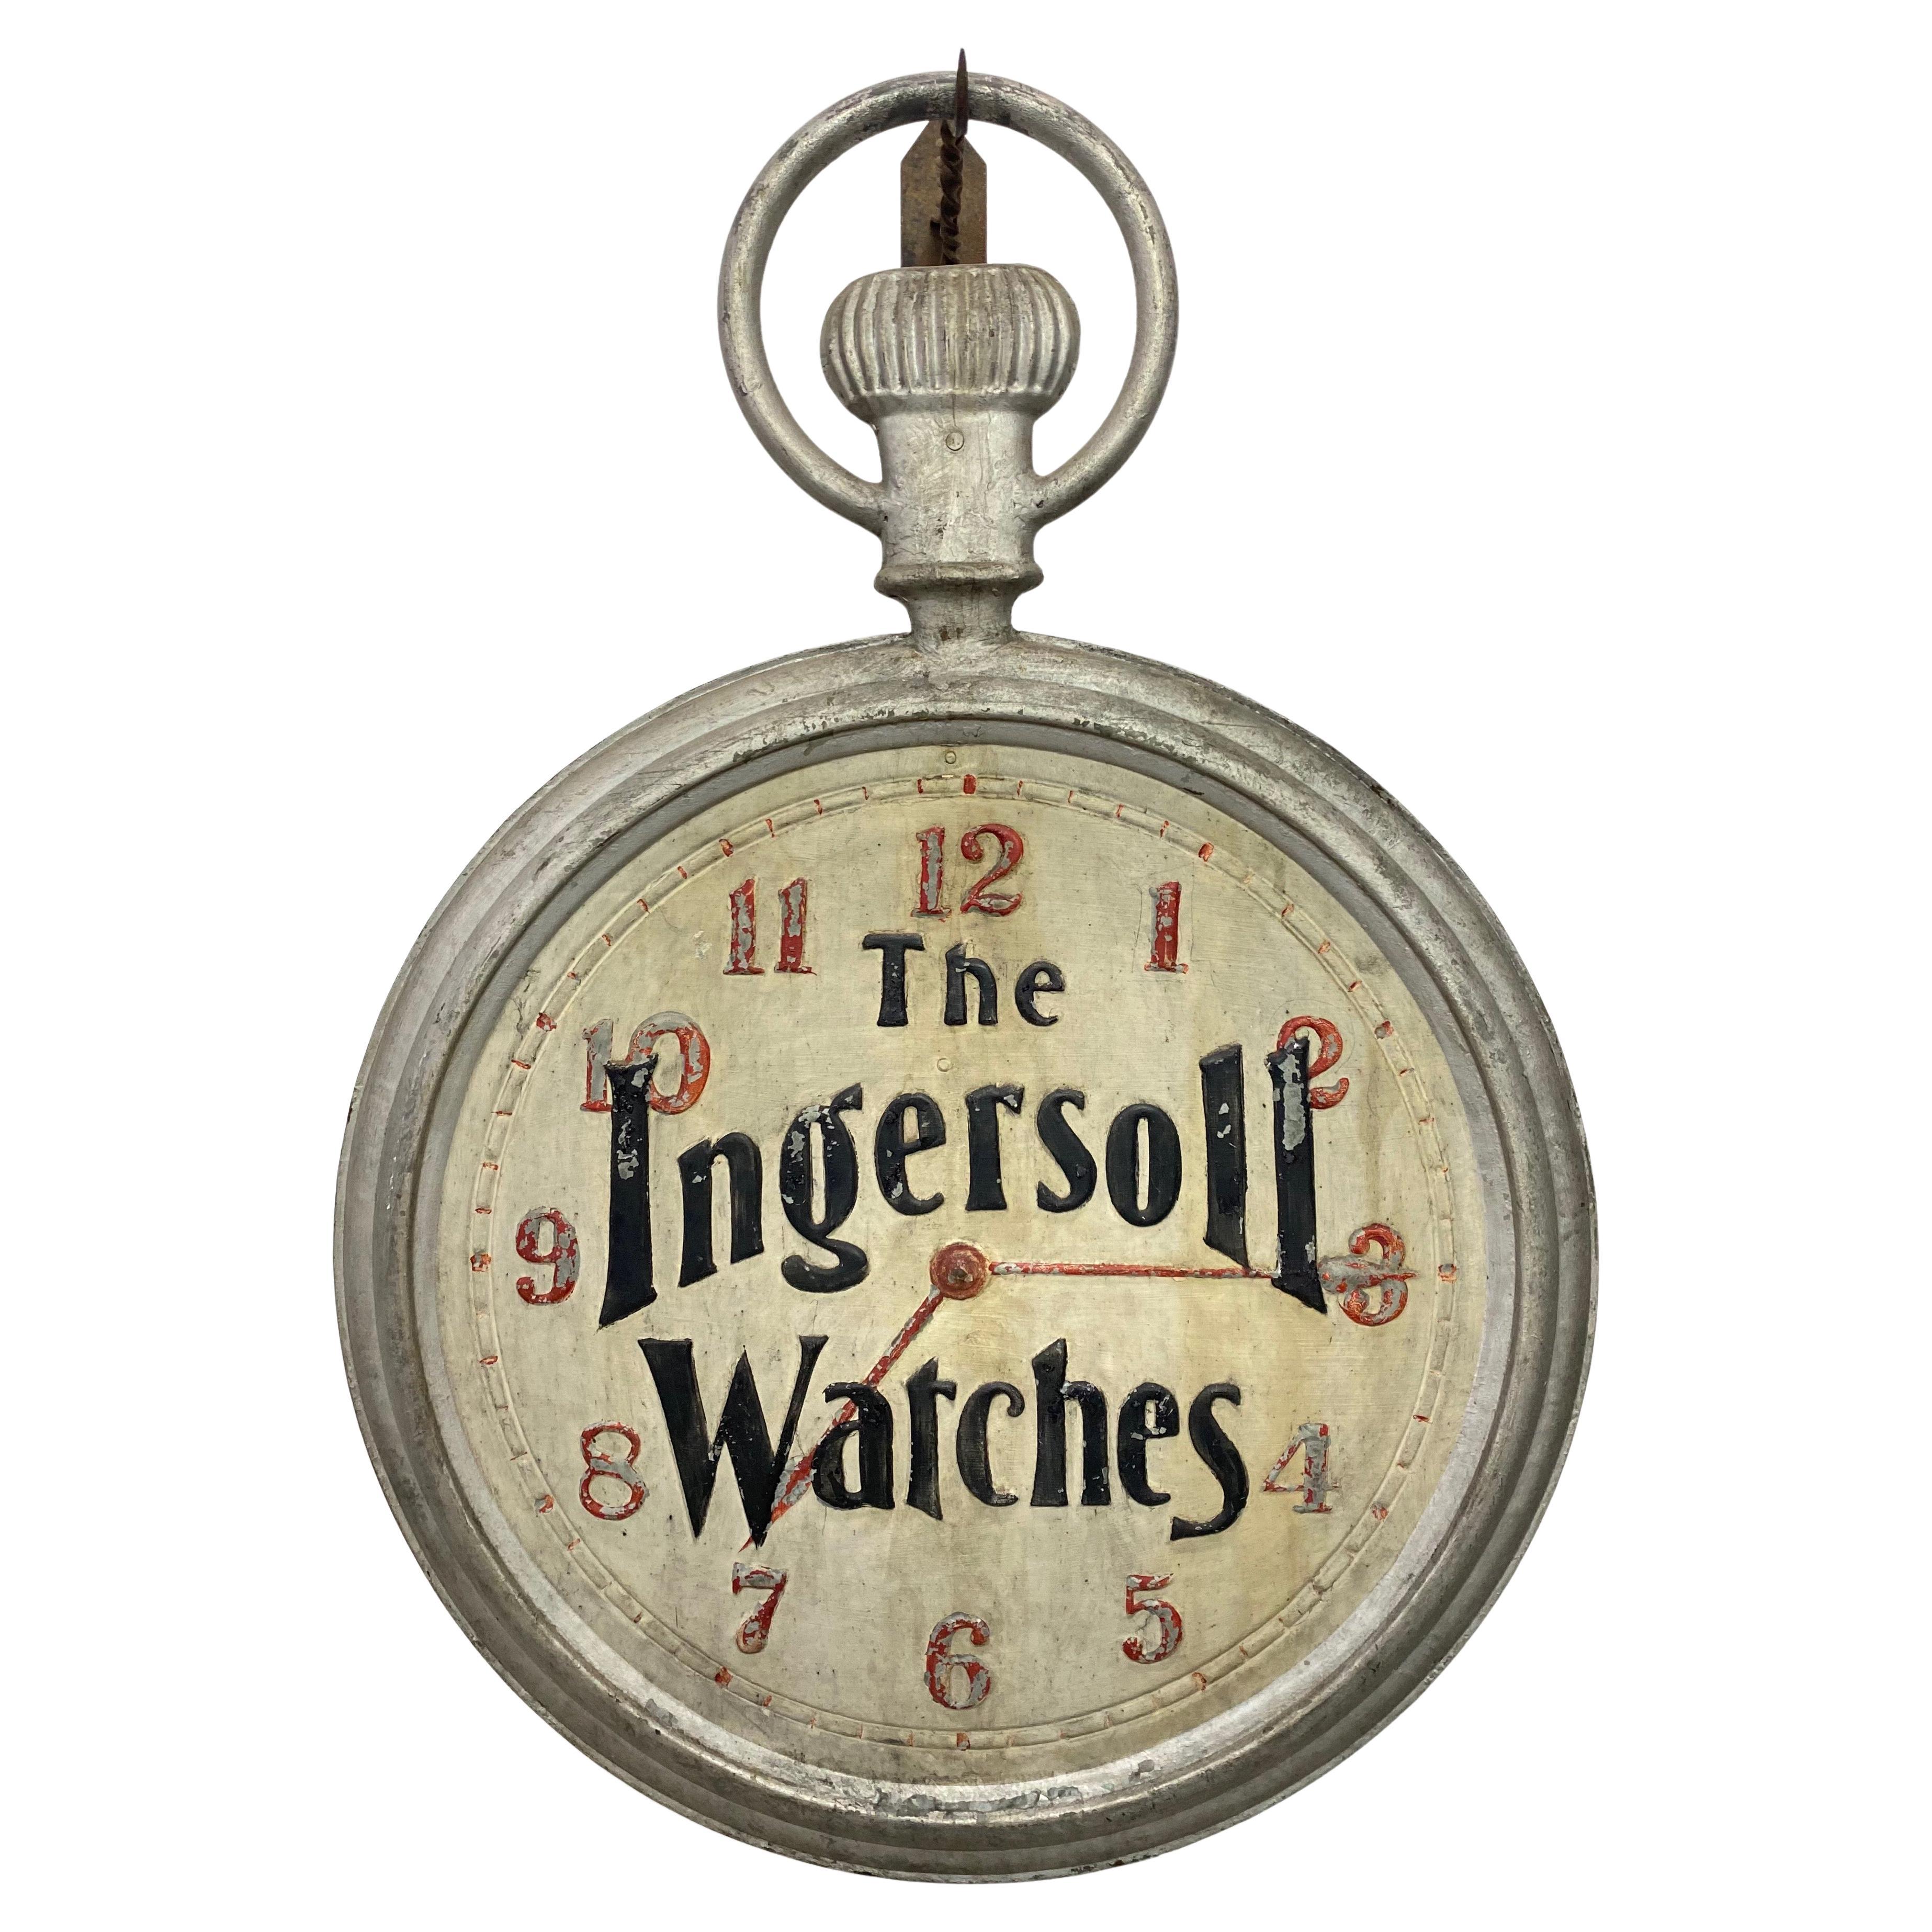 Antique Ingersoll Watches Adverting Trade Sign, circa 1900